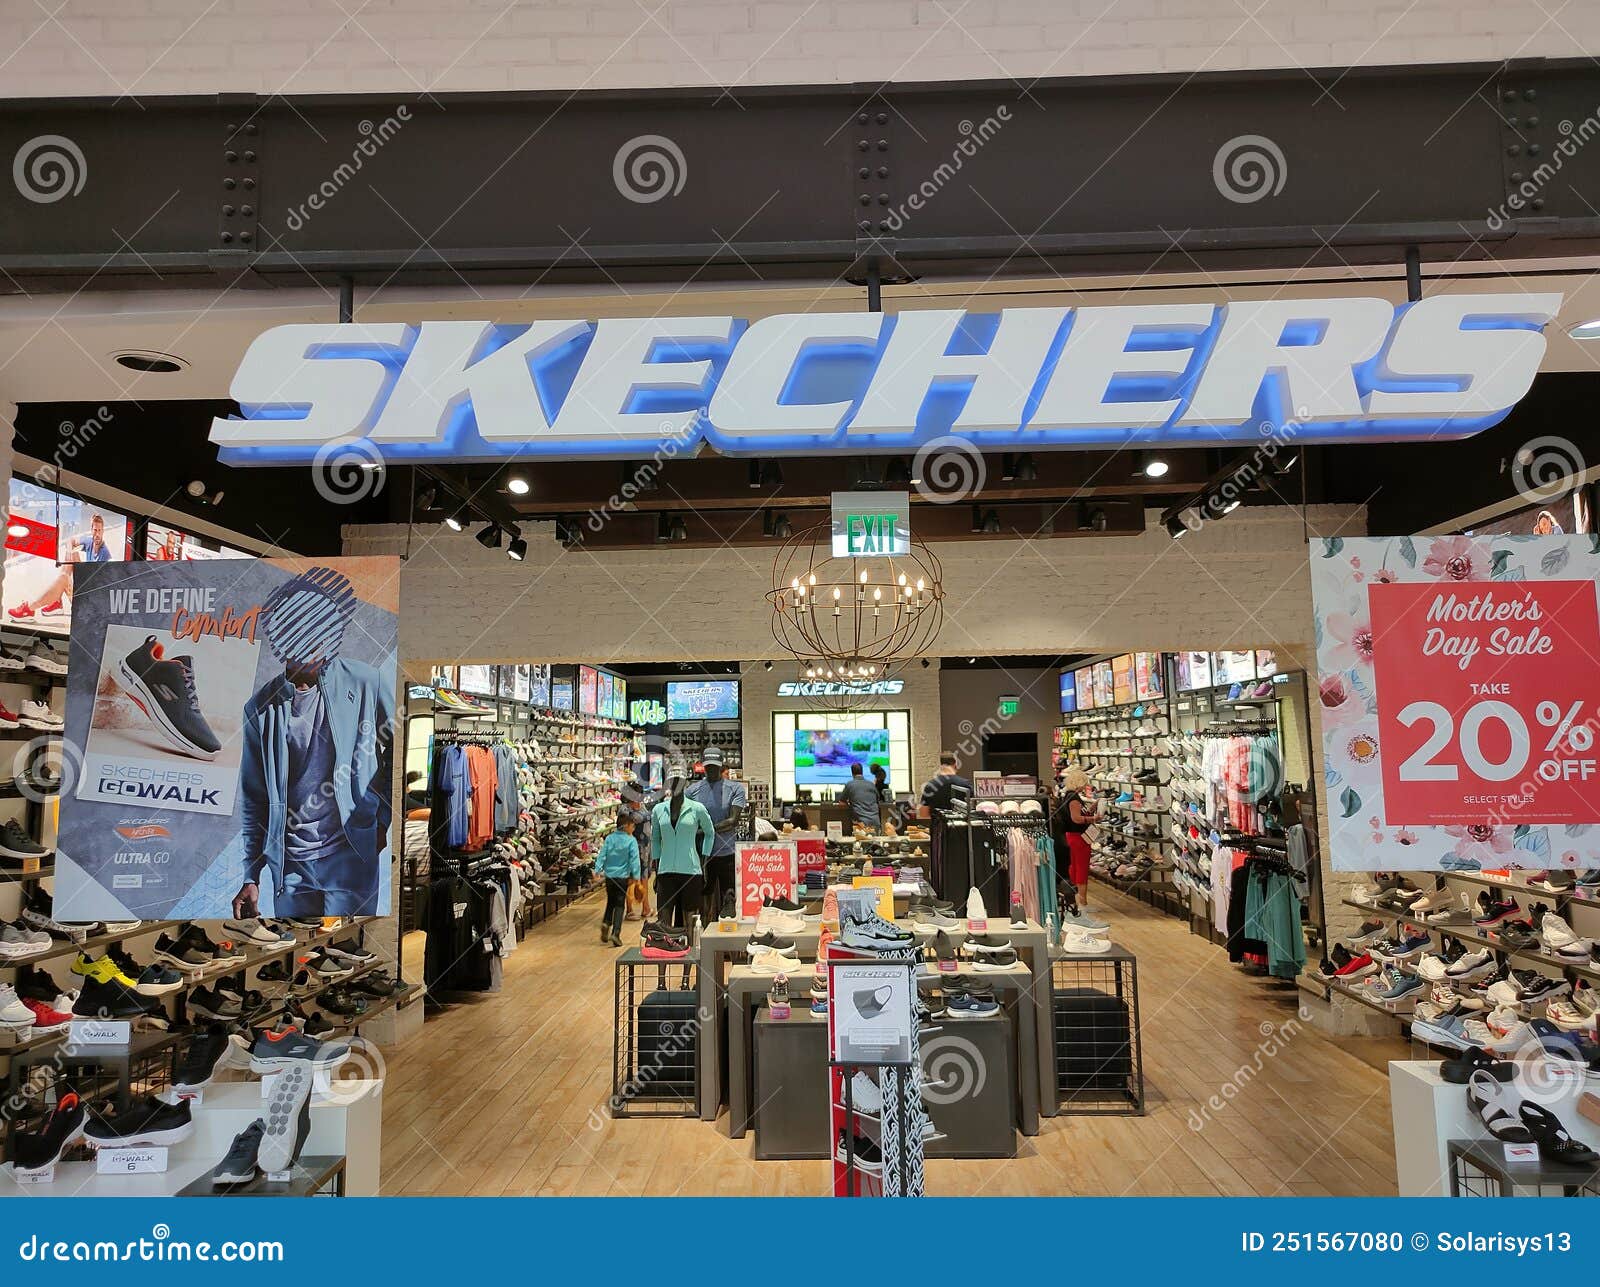 Skechers Brand of Shoes at the Mall, Florida, USA Image - of culture: 251567080